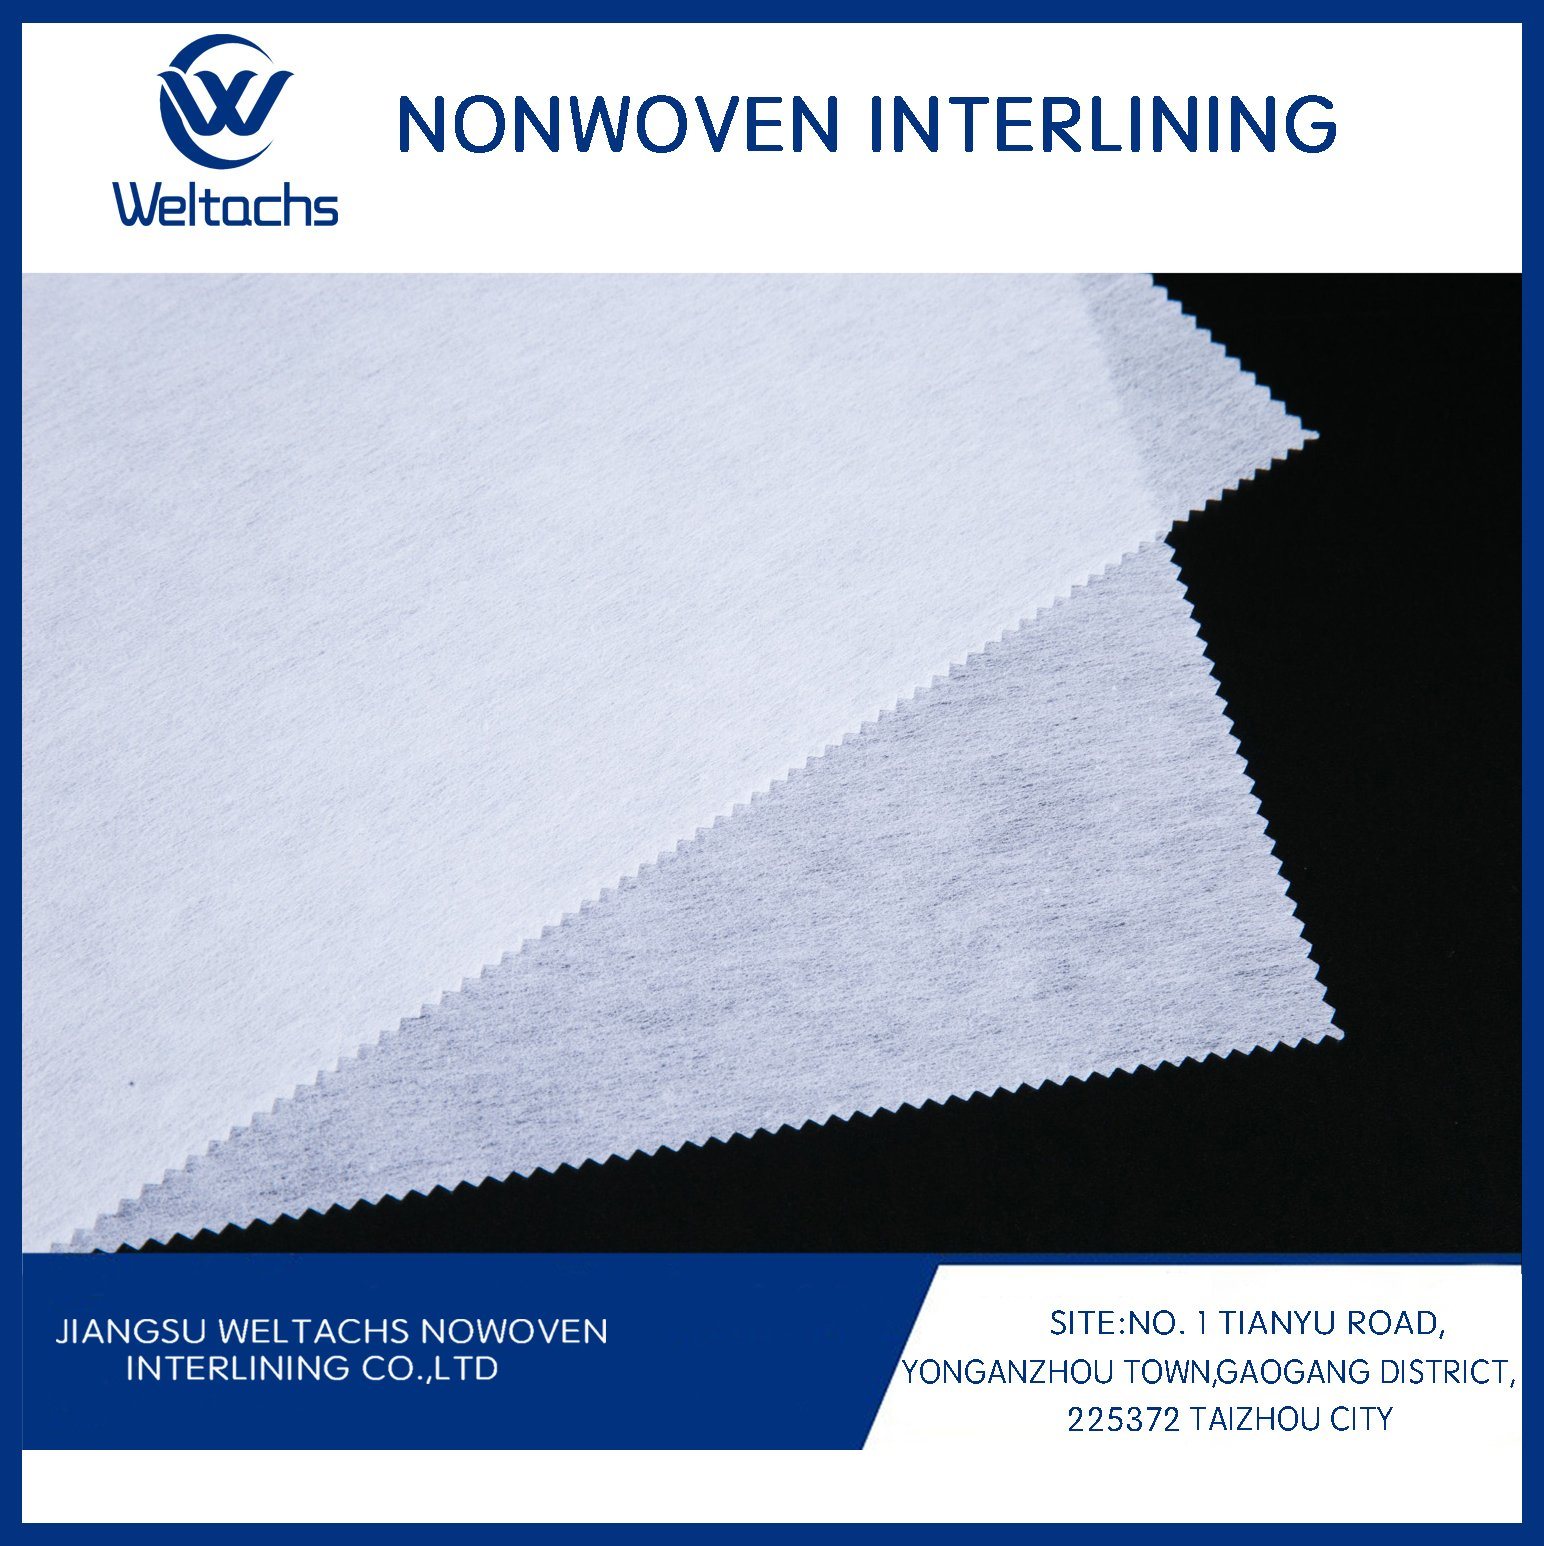 Hot Selling Gum Stay Stock Lot of Non Woven Fusible Interlining